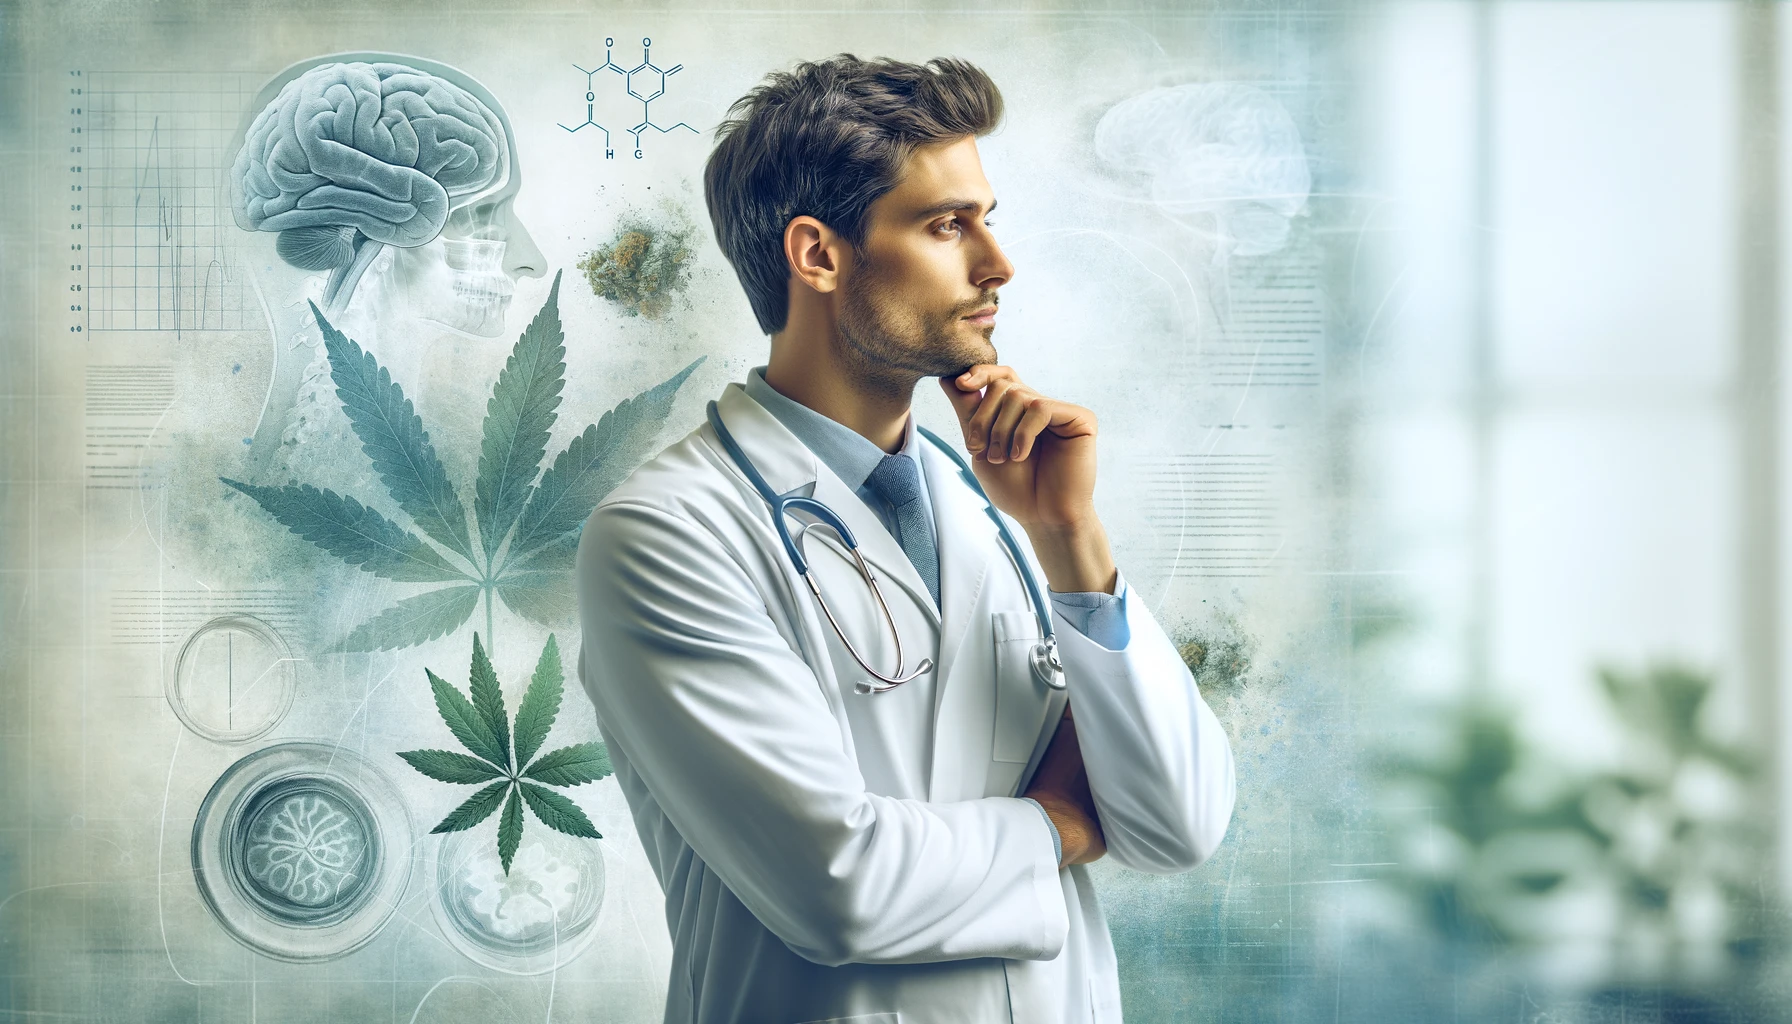 Physician thinking about cannabis mental health